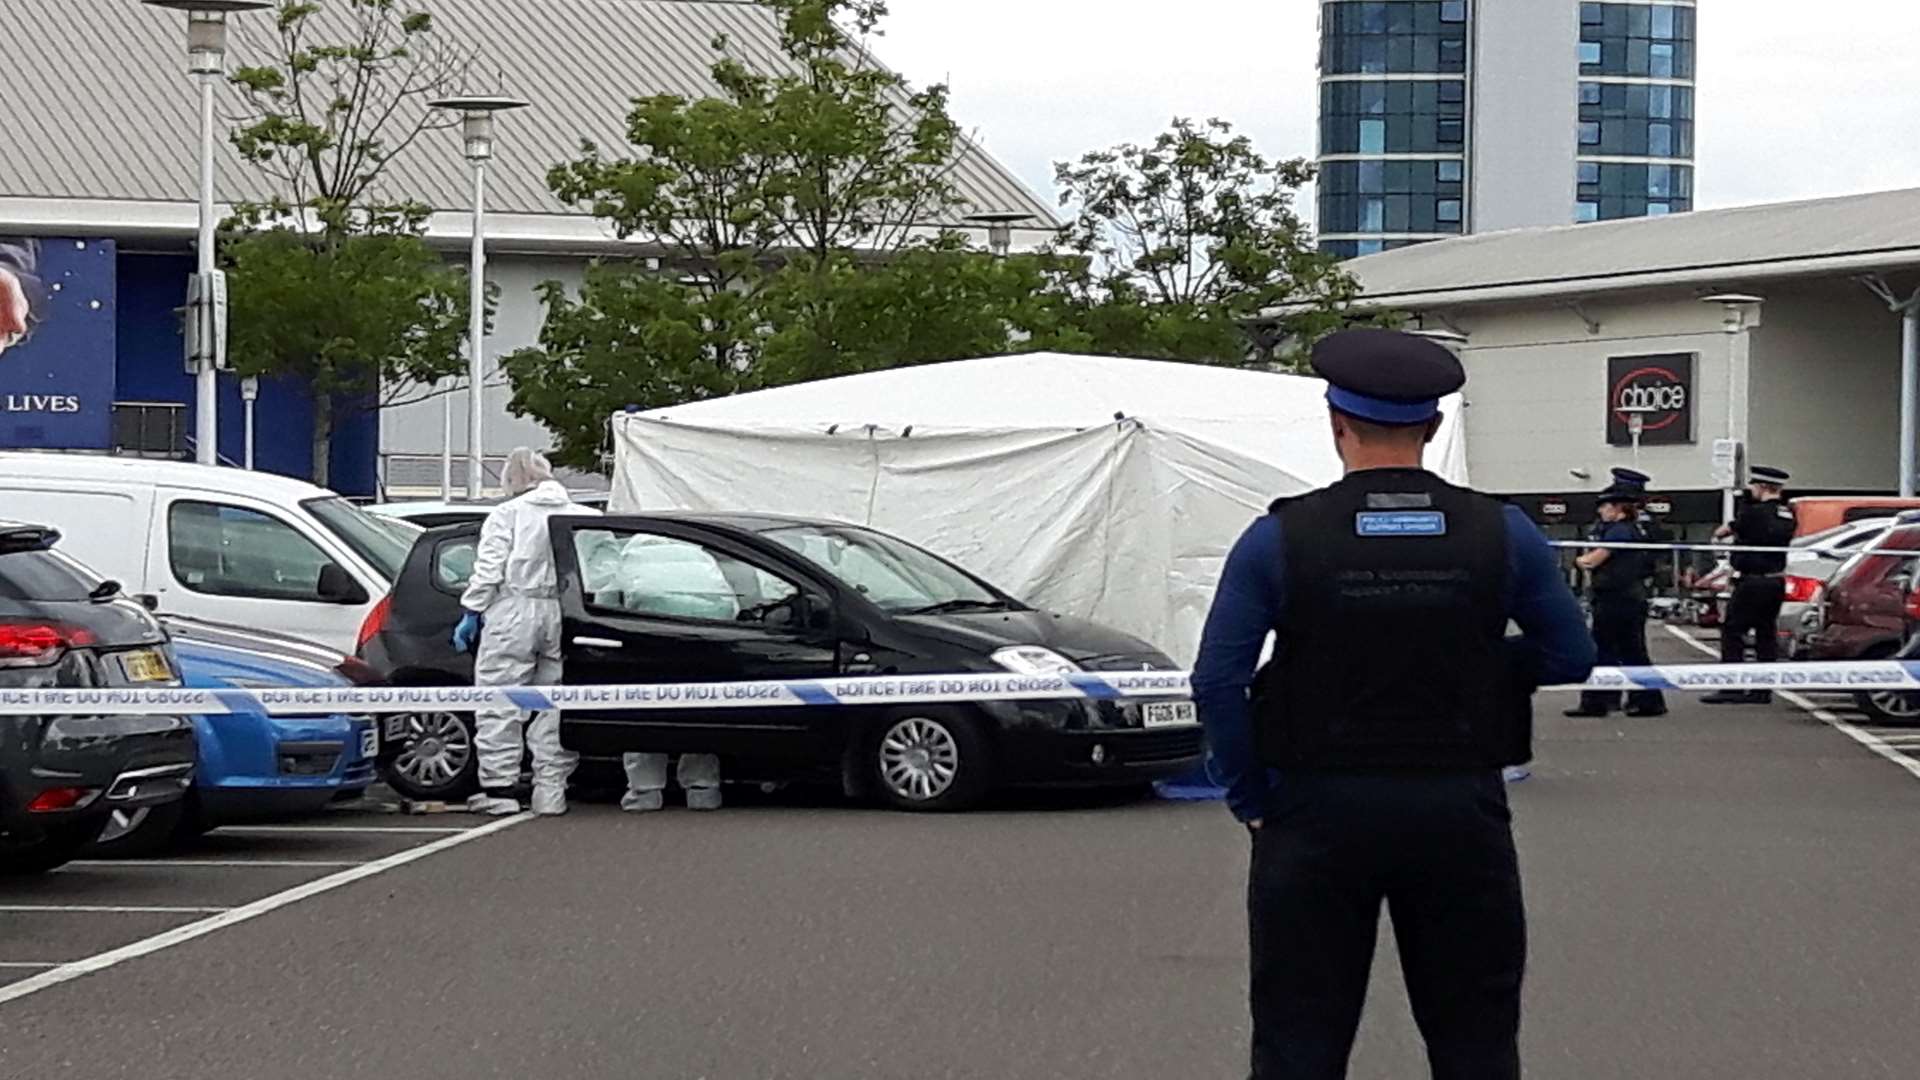 Molly McLaren died in the car park of the Dockside Shopping Outlet in Chatham